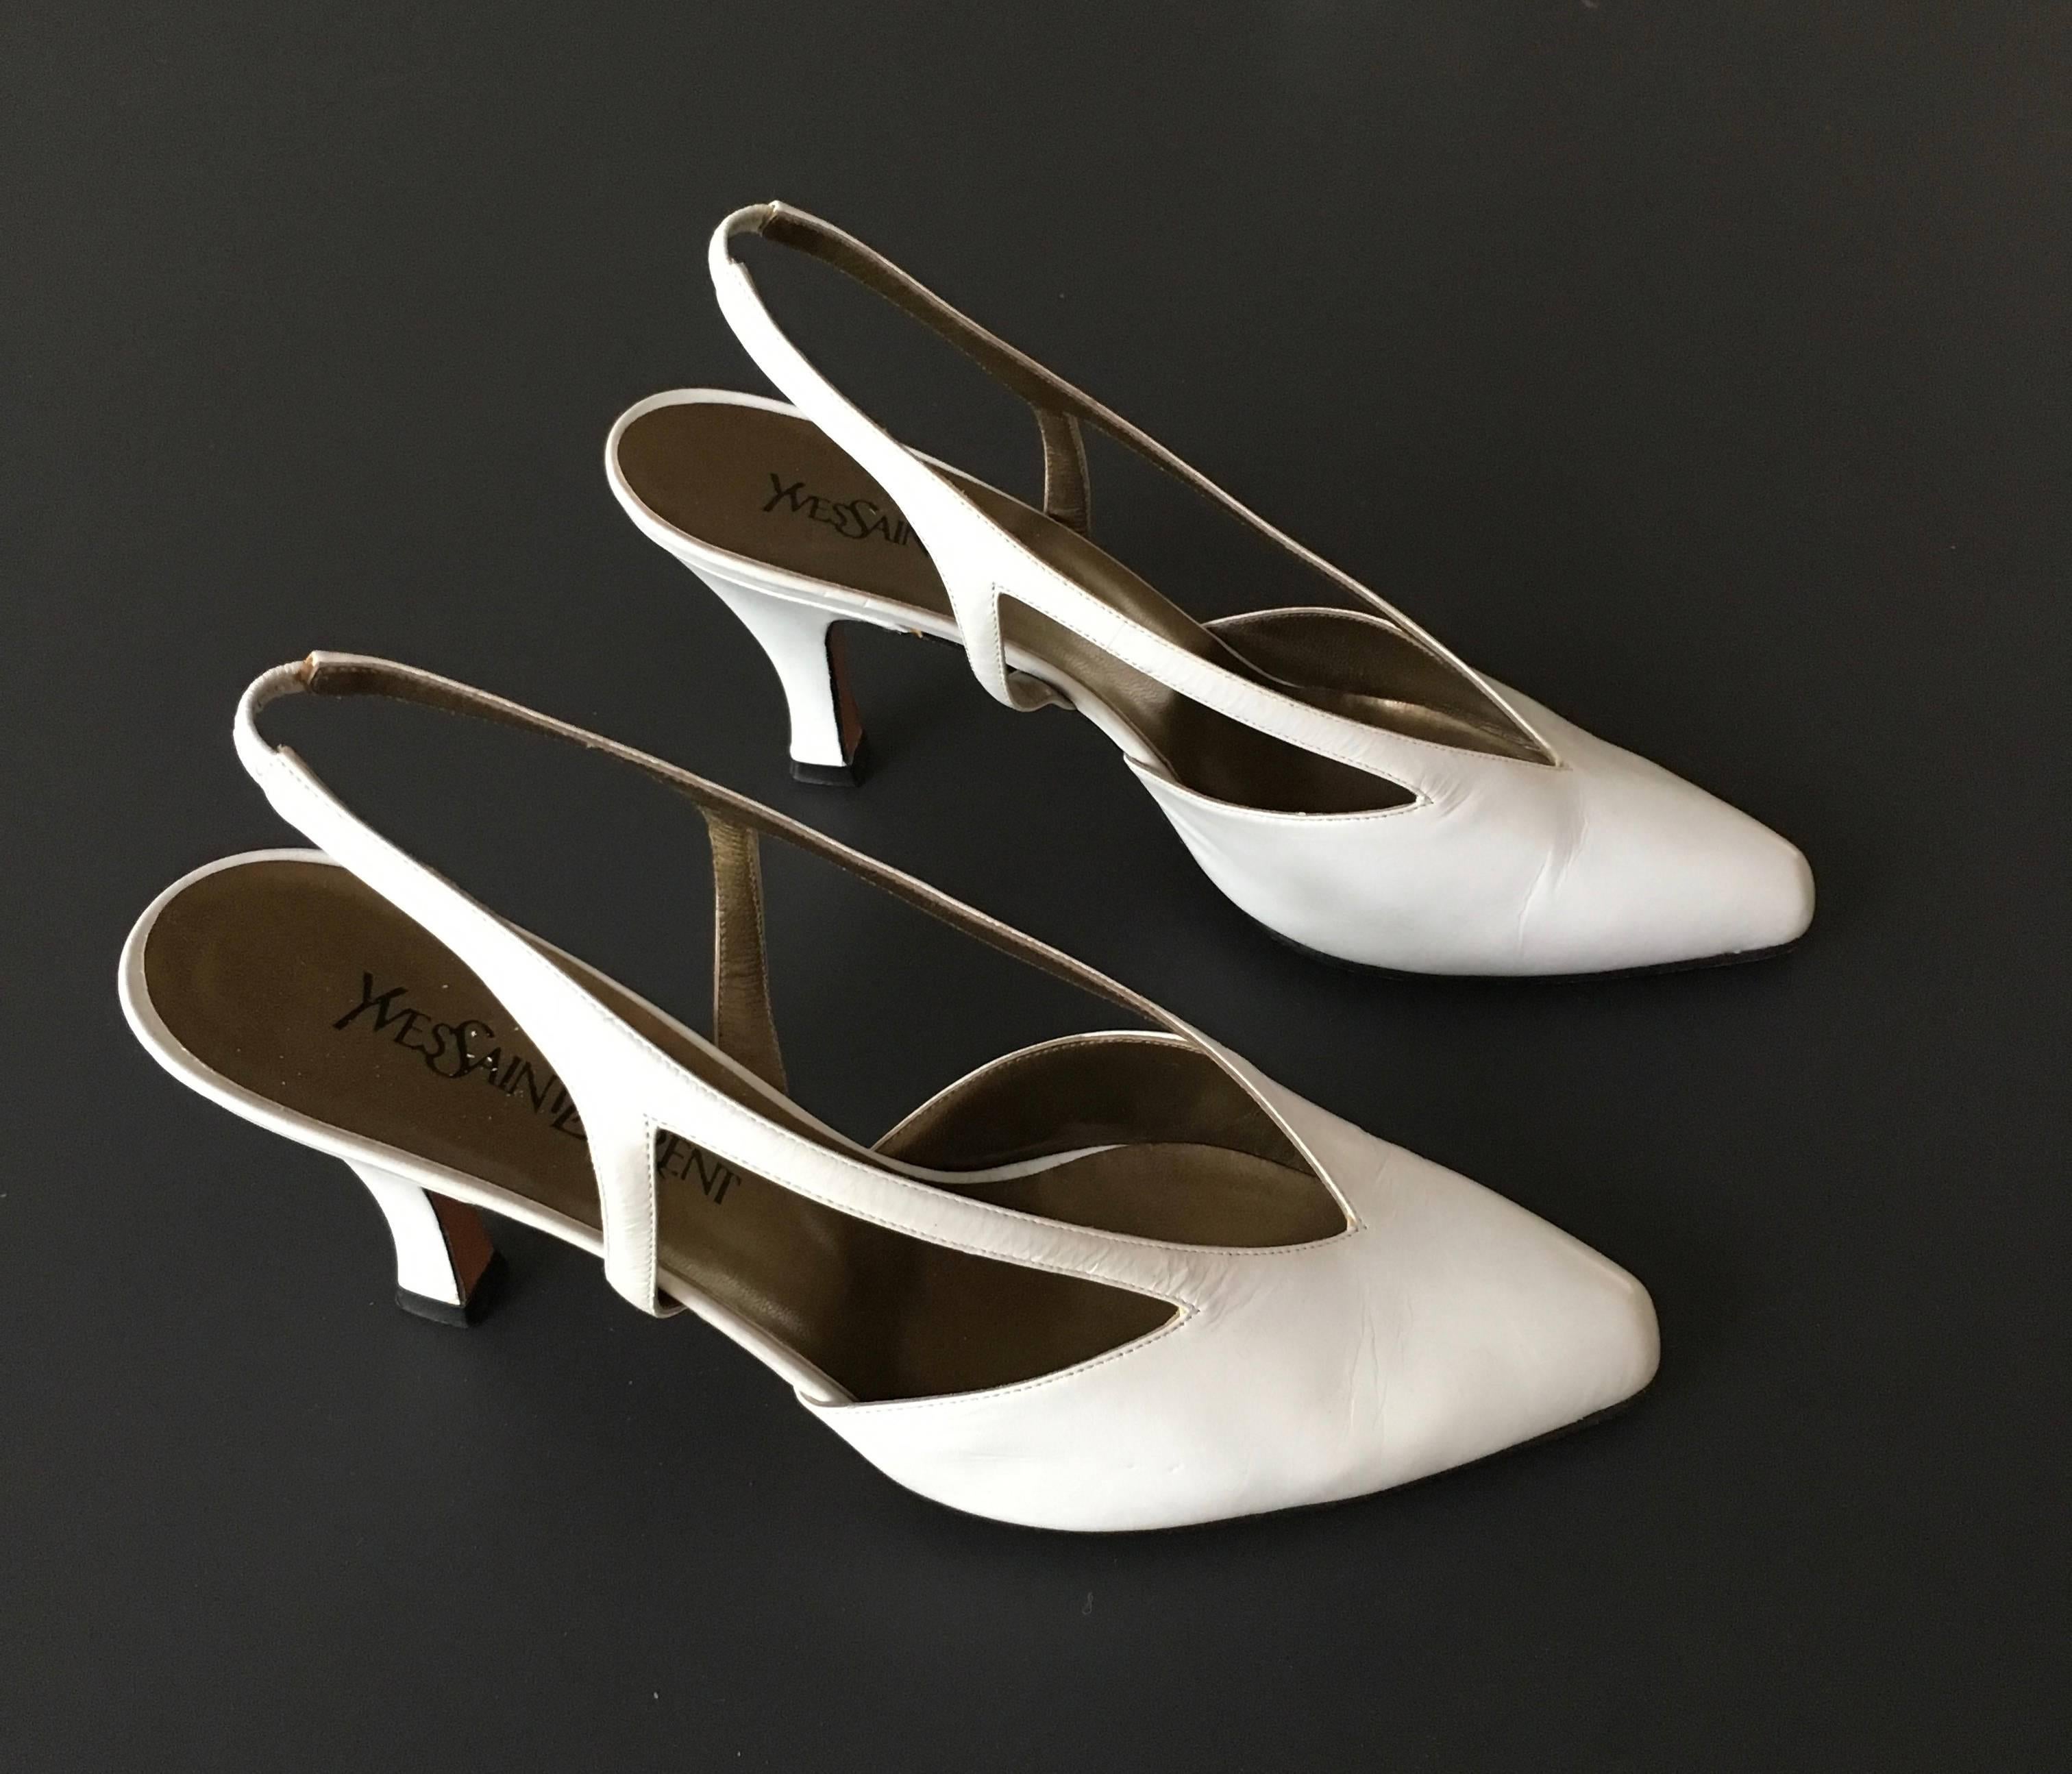 Yves Saint Laurent 1990s white leather slingback high heels is size 9.5 M.  Made in Italy.  Wear these YSL classic heels with your vintage 1980s Calvin Klein jeans or your Chanel cream pantsuit.
3. 1/2